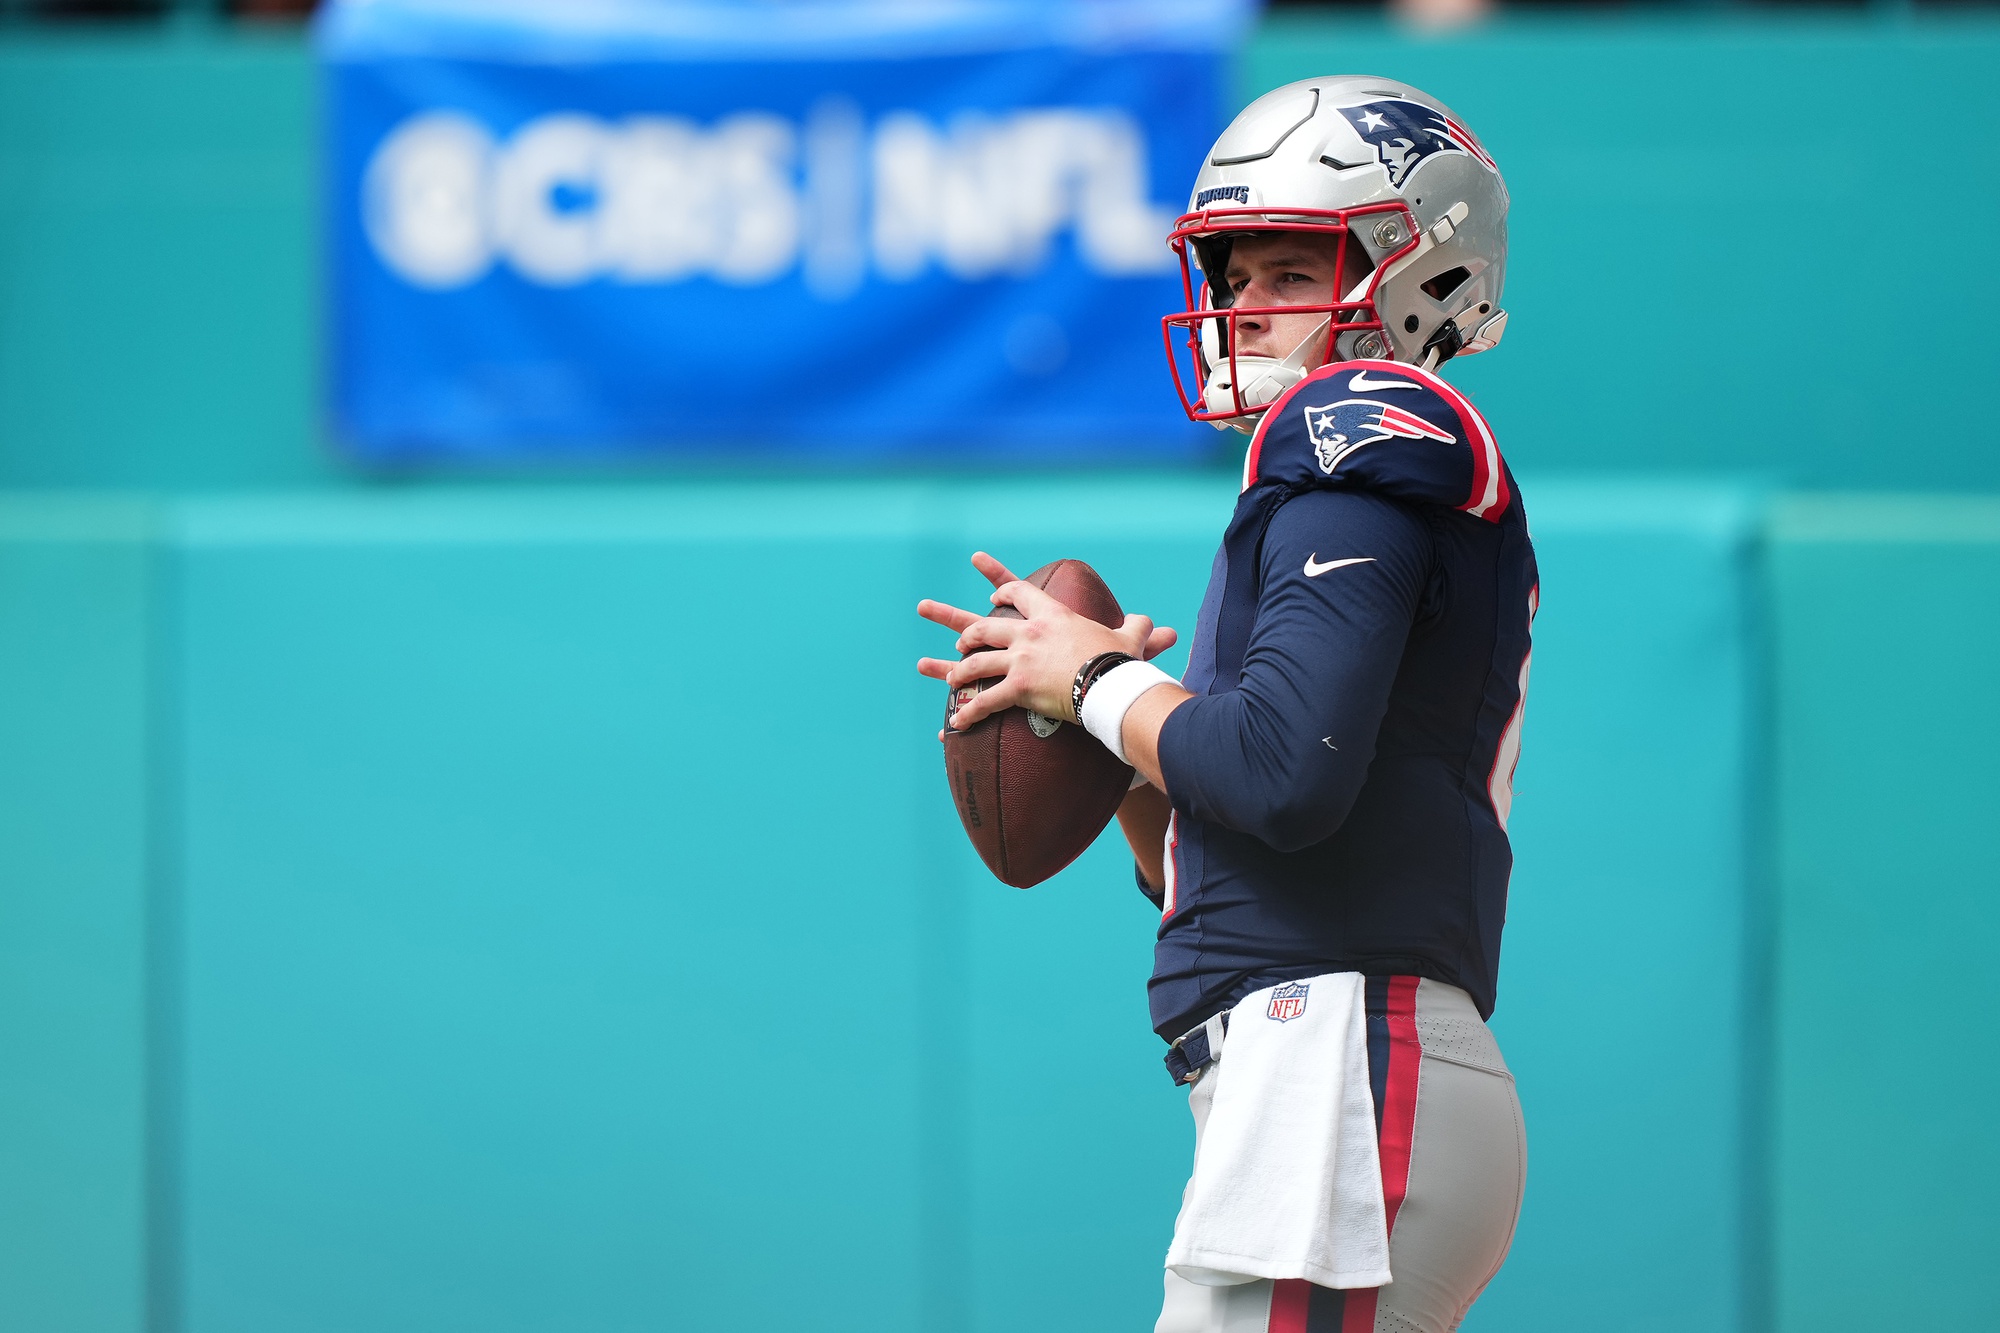 Bailey Zappe College Stats A Look at the New Patriots Starting QB Past